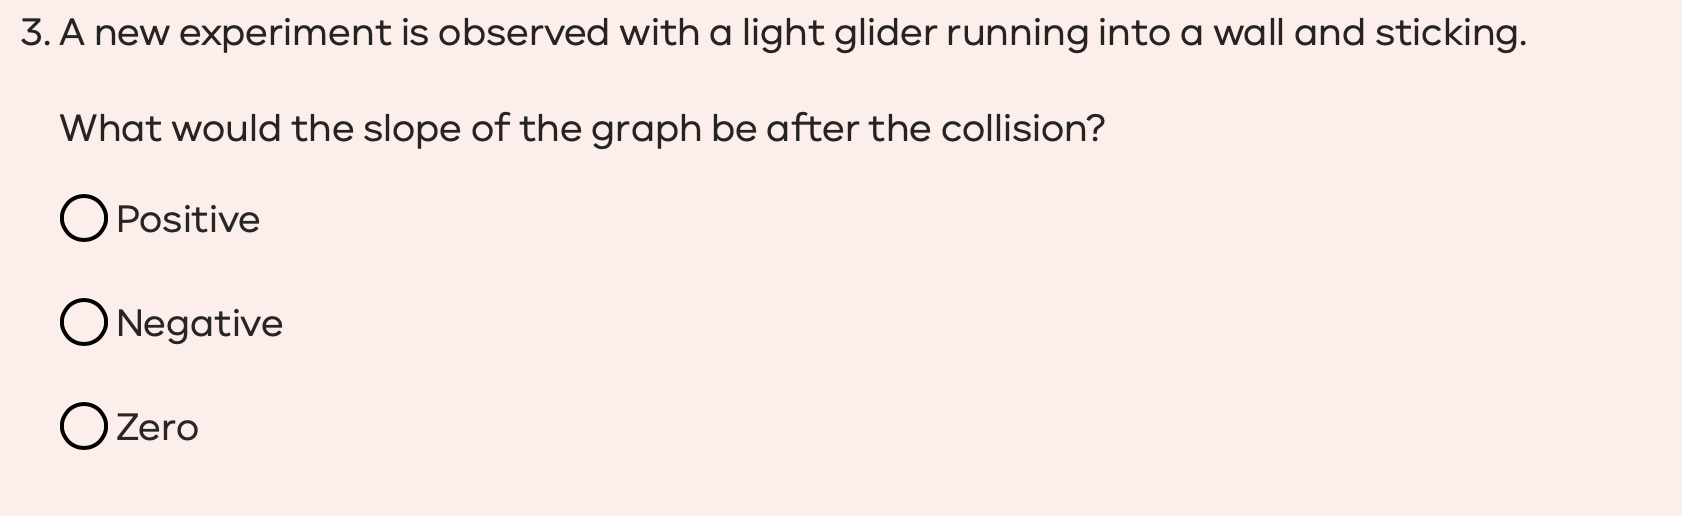 3. A new experiment is observed with a light glider running into a wall and sticking. What would the slope of